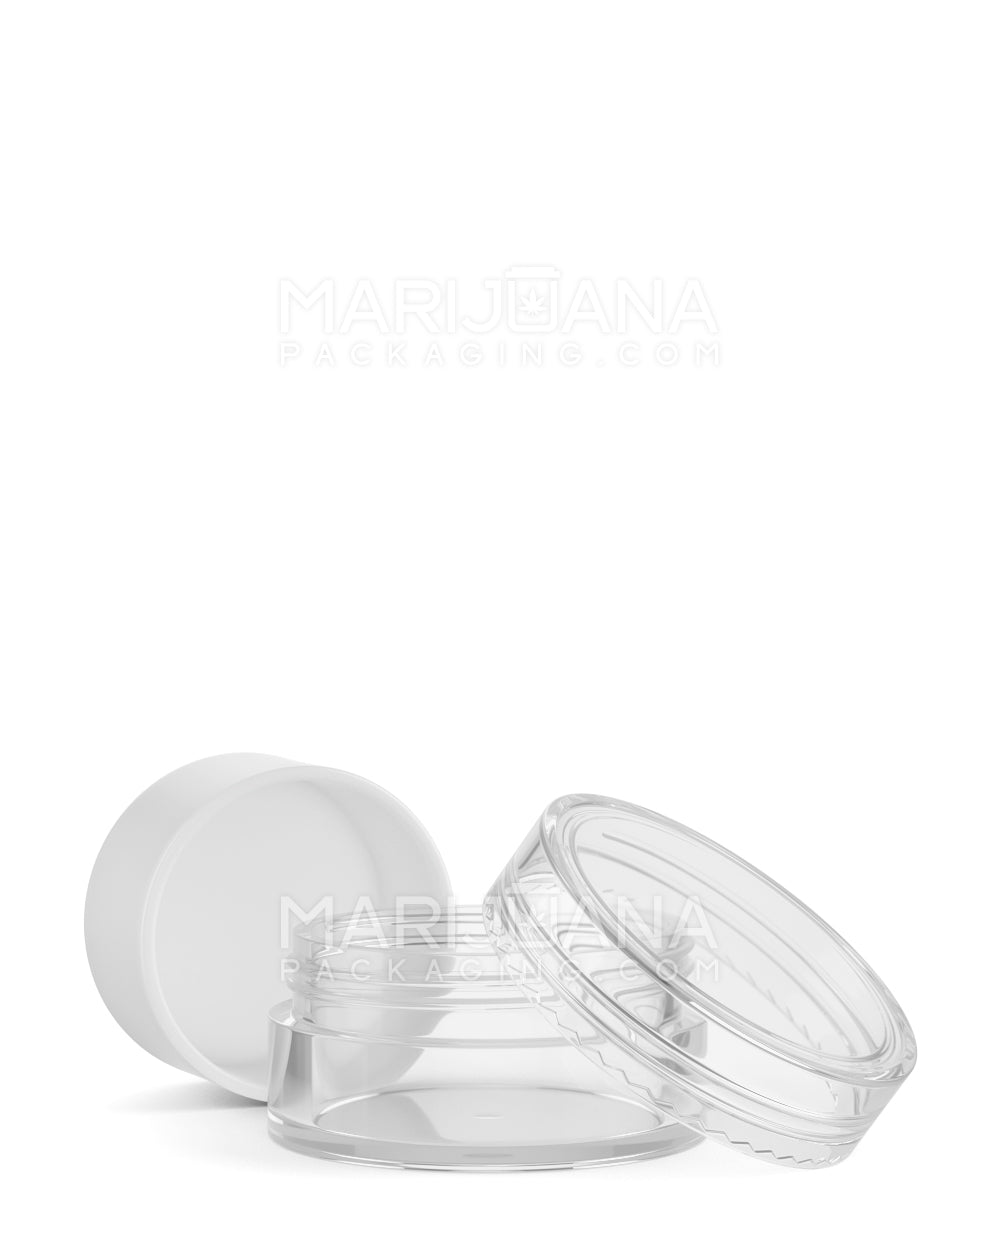 Clear Concentrate Containers w/ Screw Top Cap & White Silicone Insert | 10mL - Plastic | Sample - 4